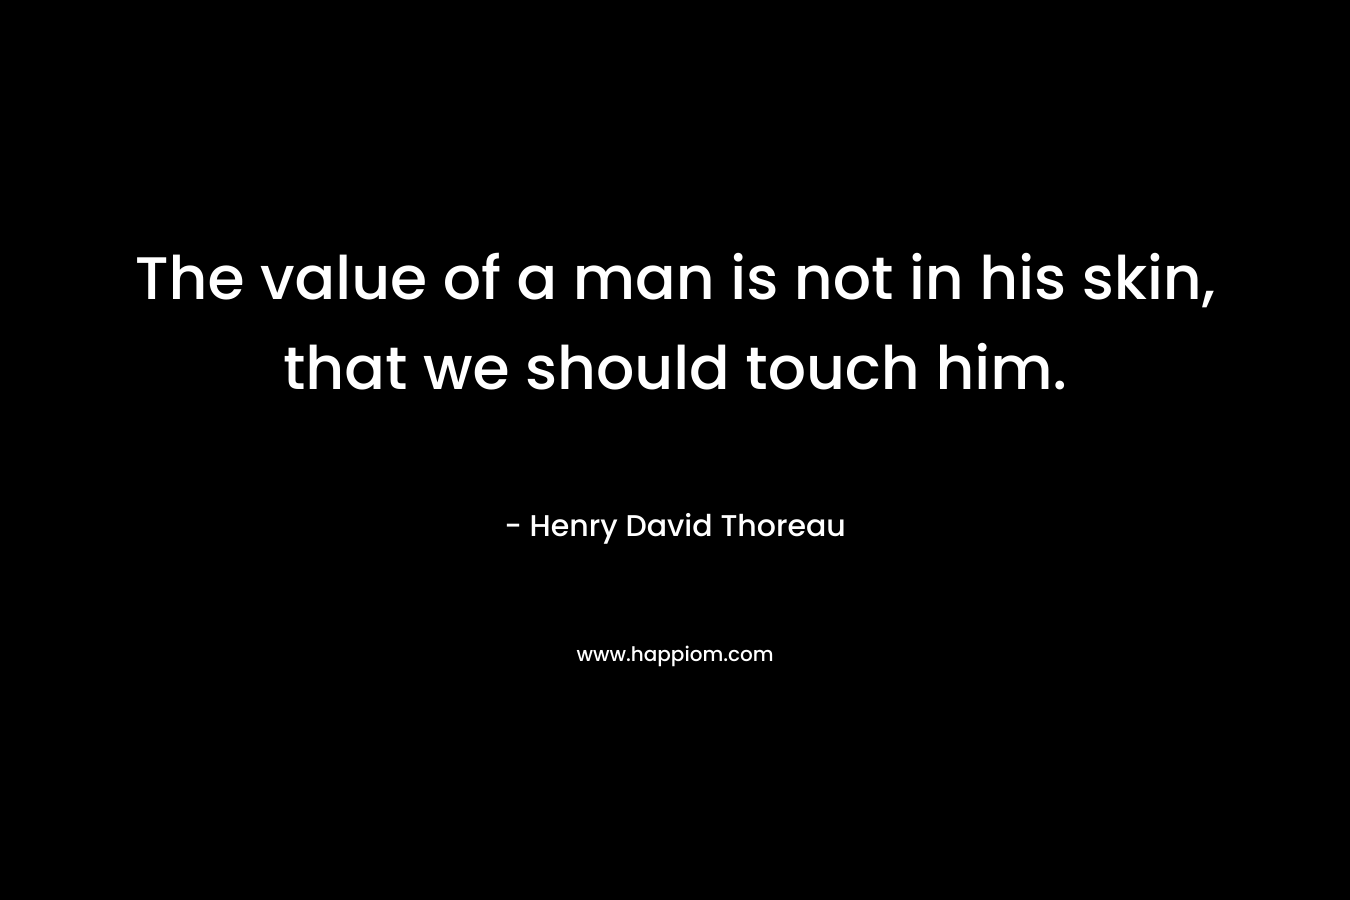 The value of a man is not in his skin, that we should touch him.